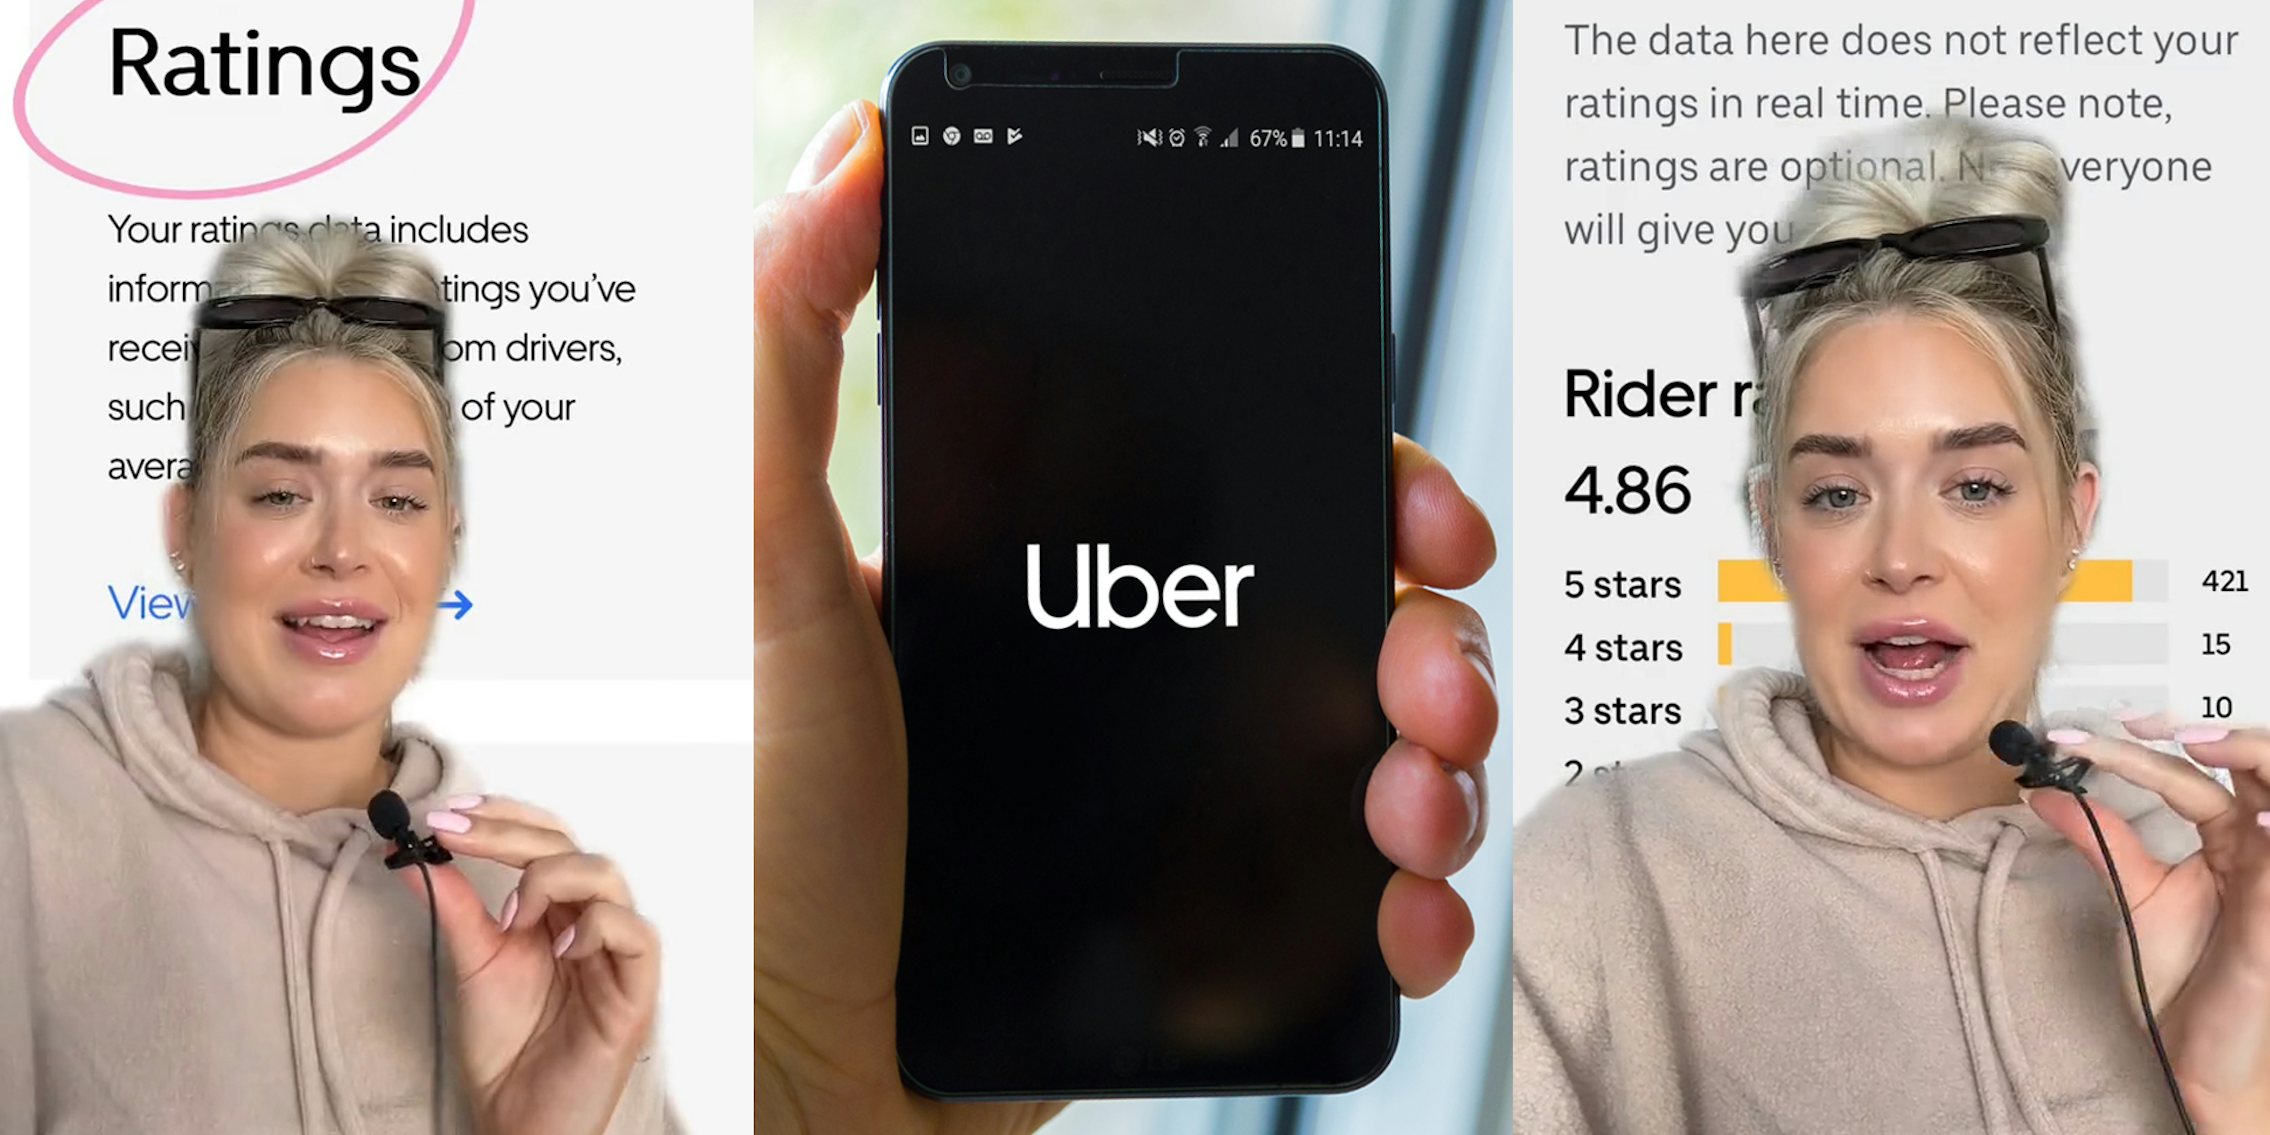 woman greenscreen TikTok over image of Uber ratings (l) Uber on phone in hand (c) woman greenscreen TikTok over image of Uber rider ratings